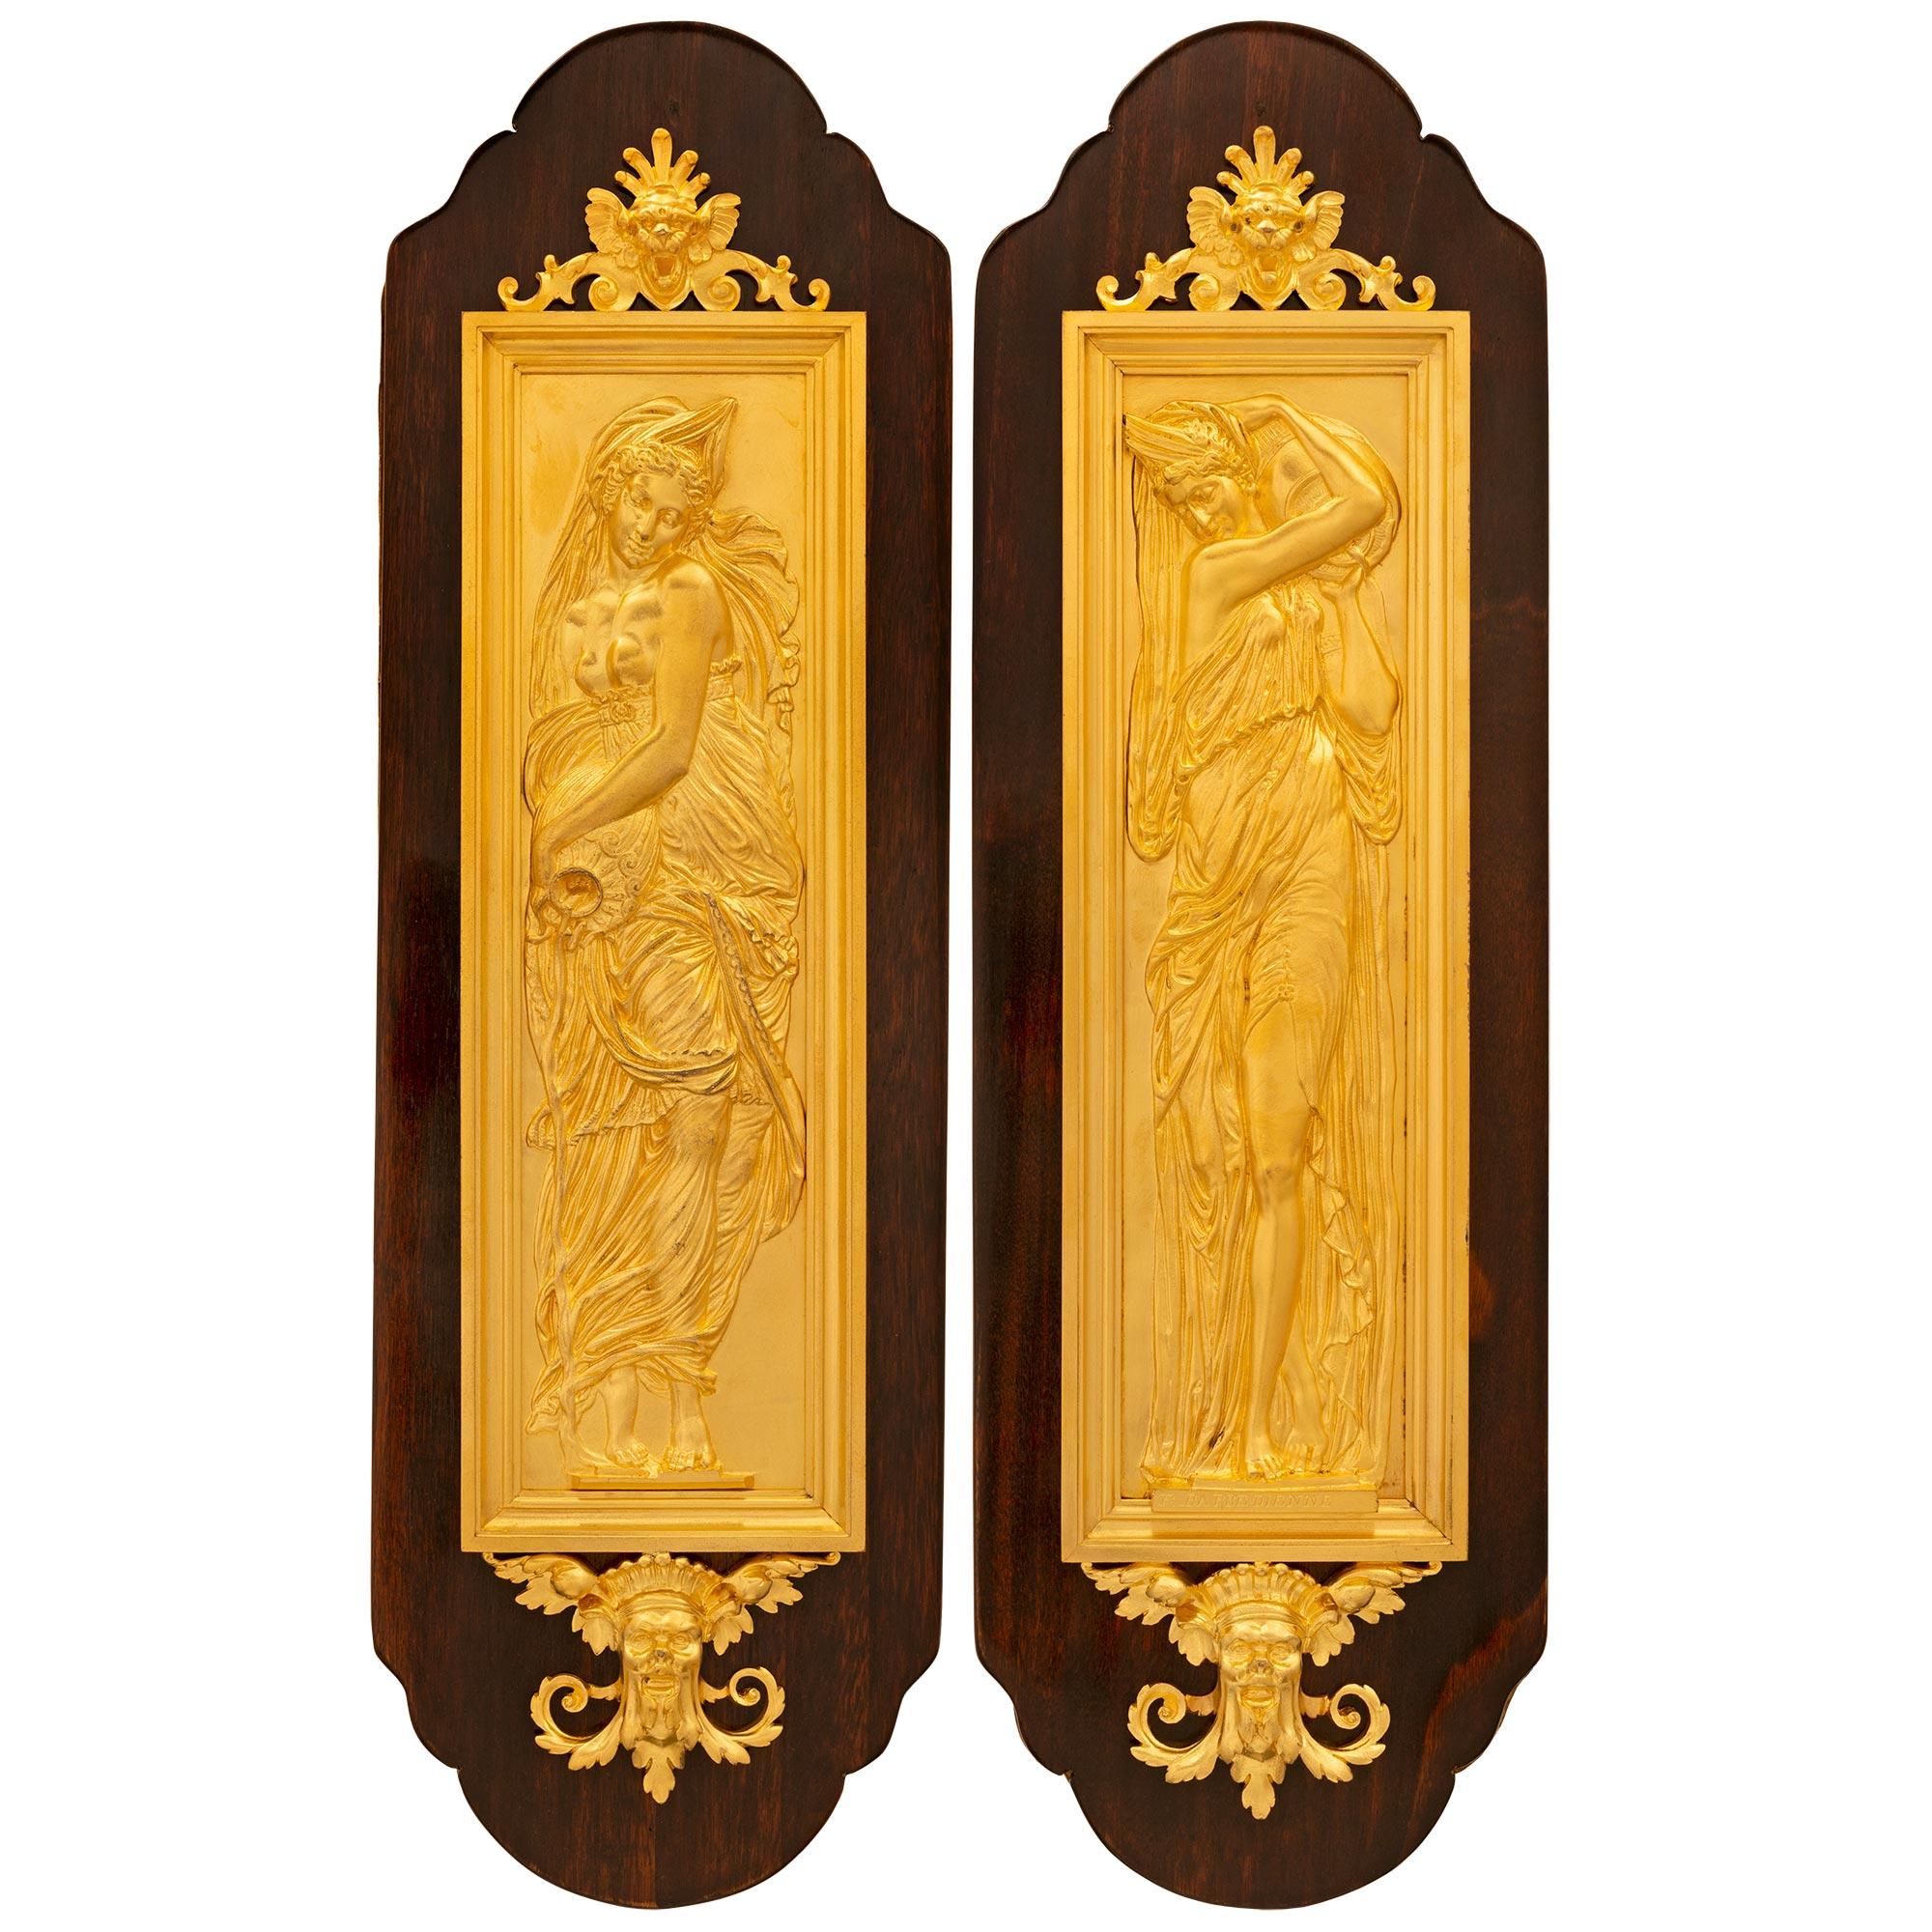 Pair of French 19th Century Belle Époque Period Mahogany & Ormolu Wall Plaques For Sale 5